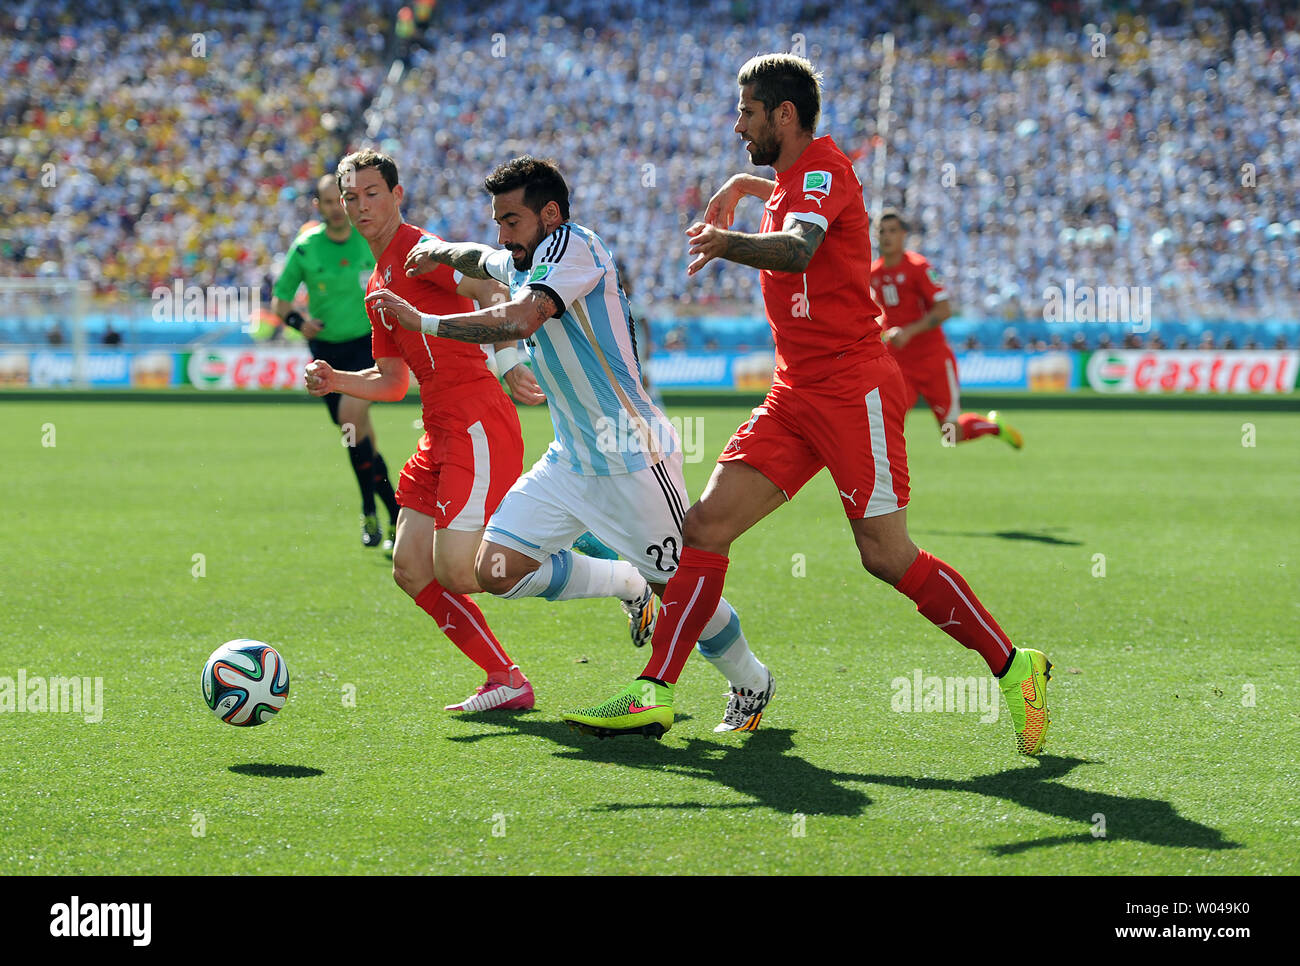 Ezequiel Lavezzi (C) of Argentina competes with Valon Behrami of Switzerland during the 2014 FIFA World Cup Round of 16 match at the Arena Corinthians in Sao Paulo, Brazil on July 01, 2014. UPI/Chris Brunskill Stock Photo